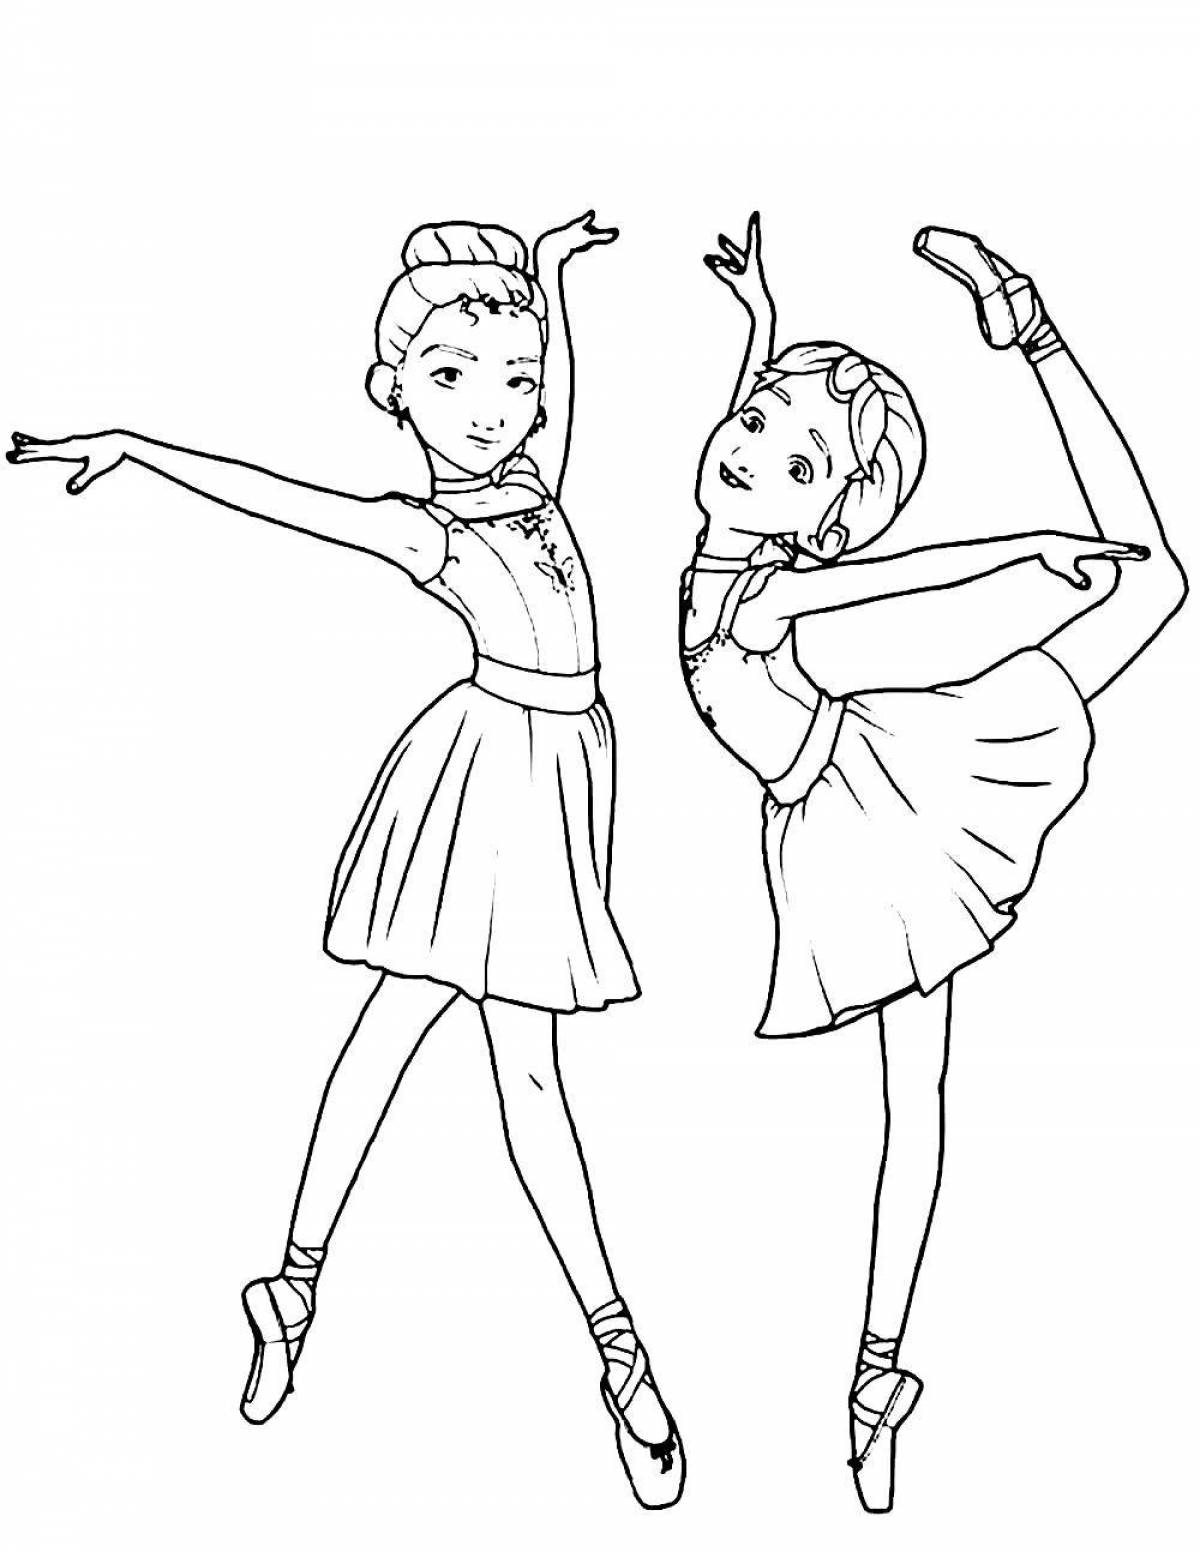 Bright ballet coloring book for kids